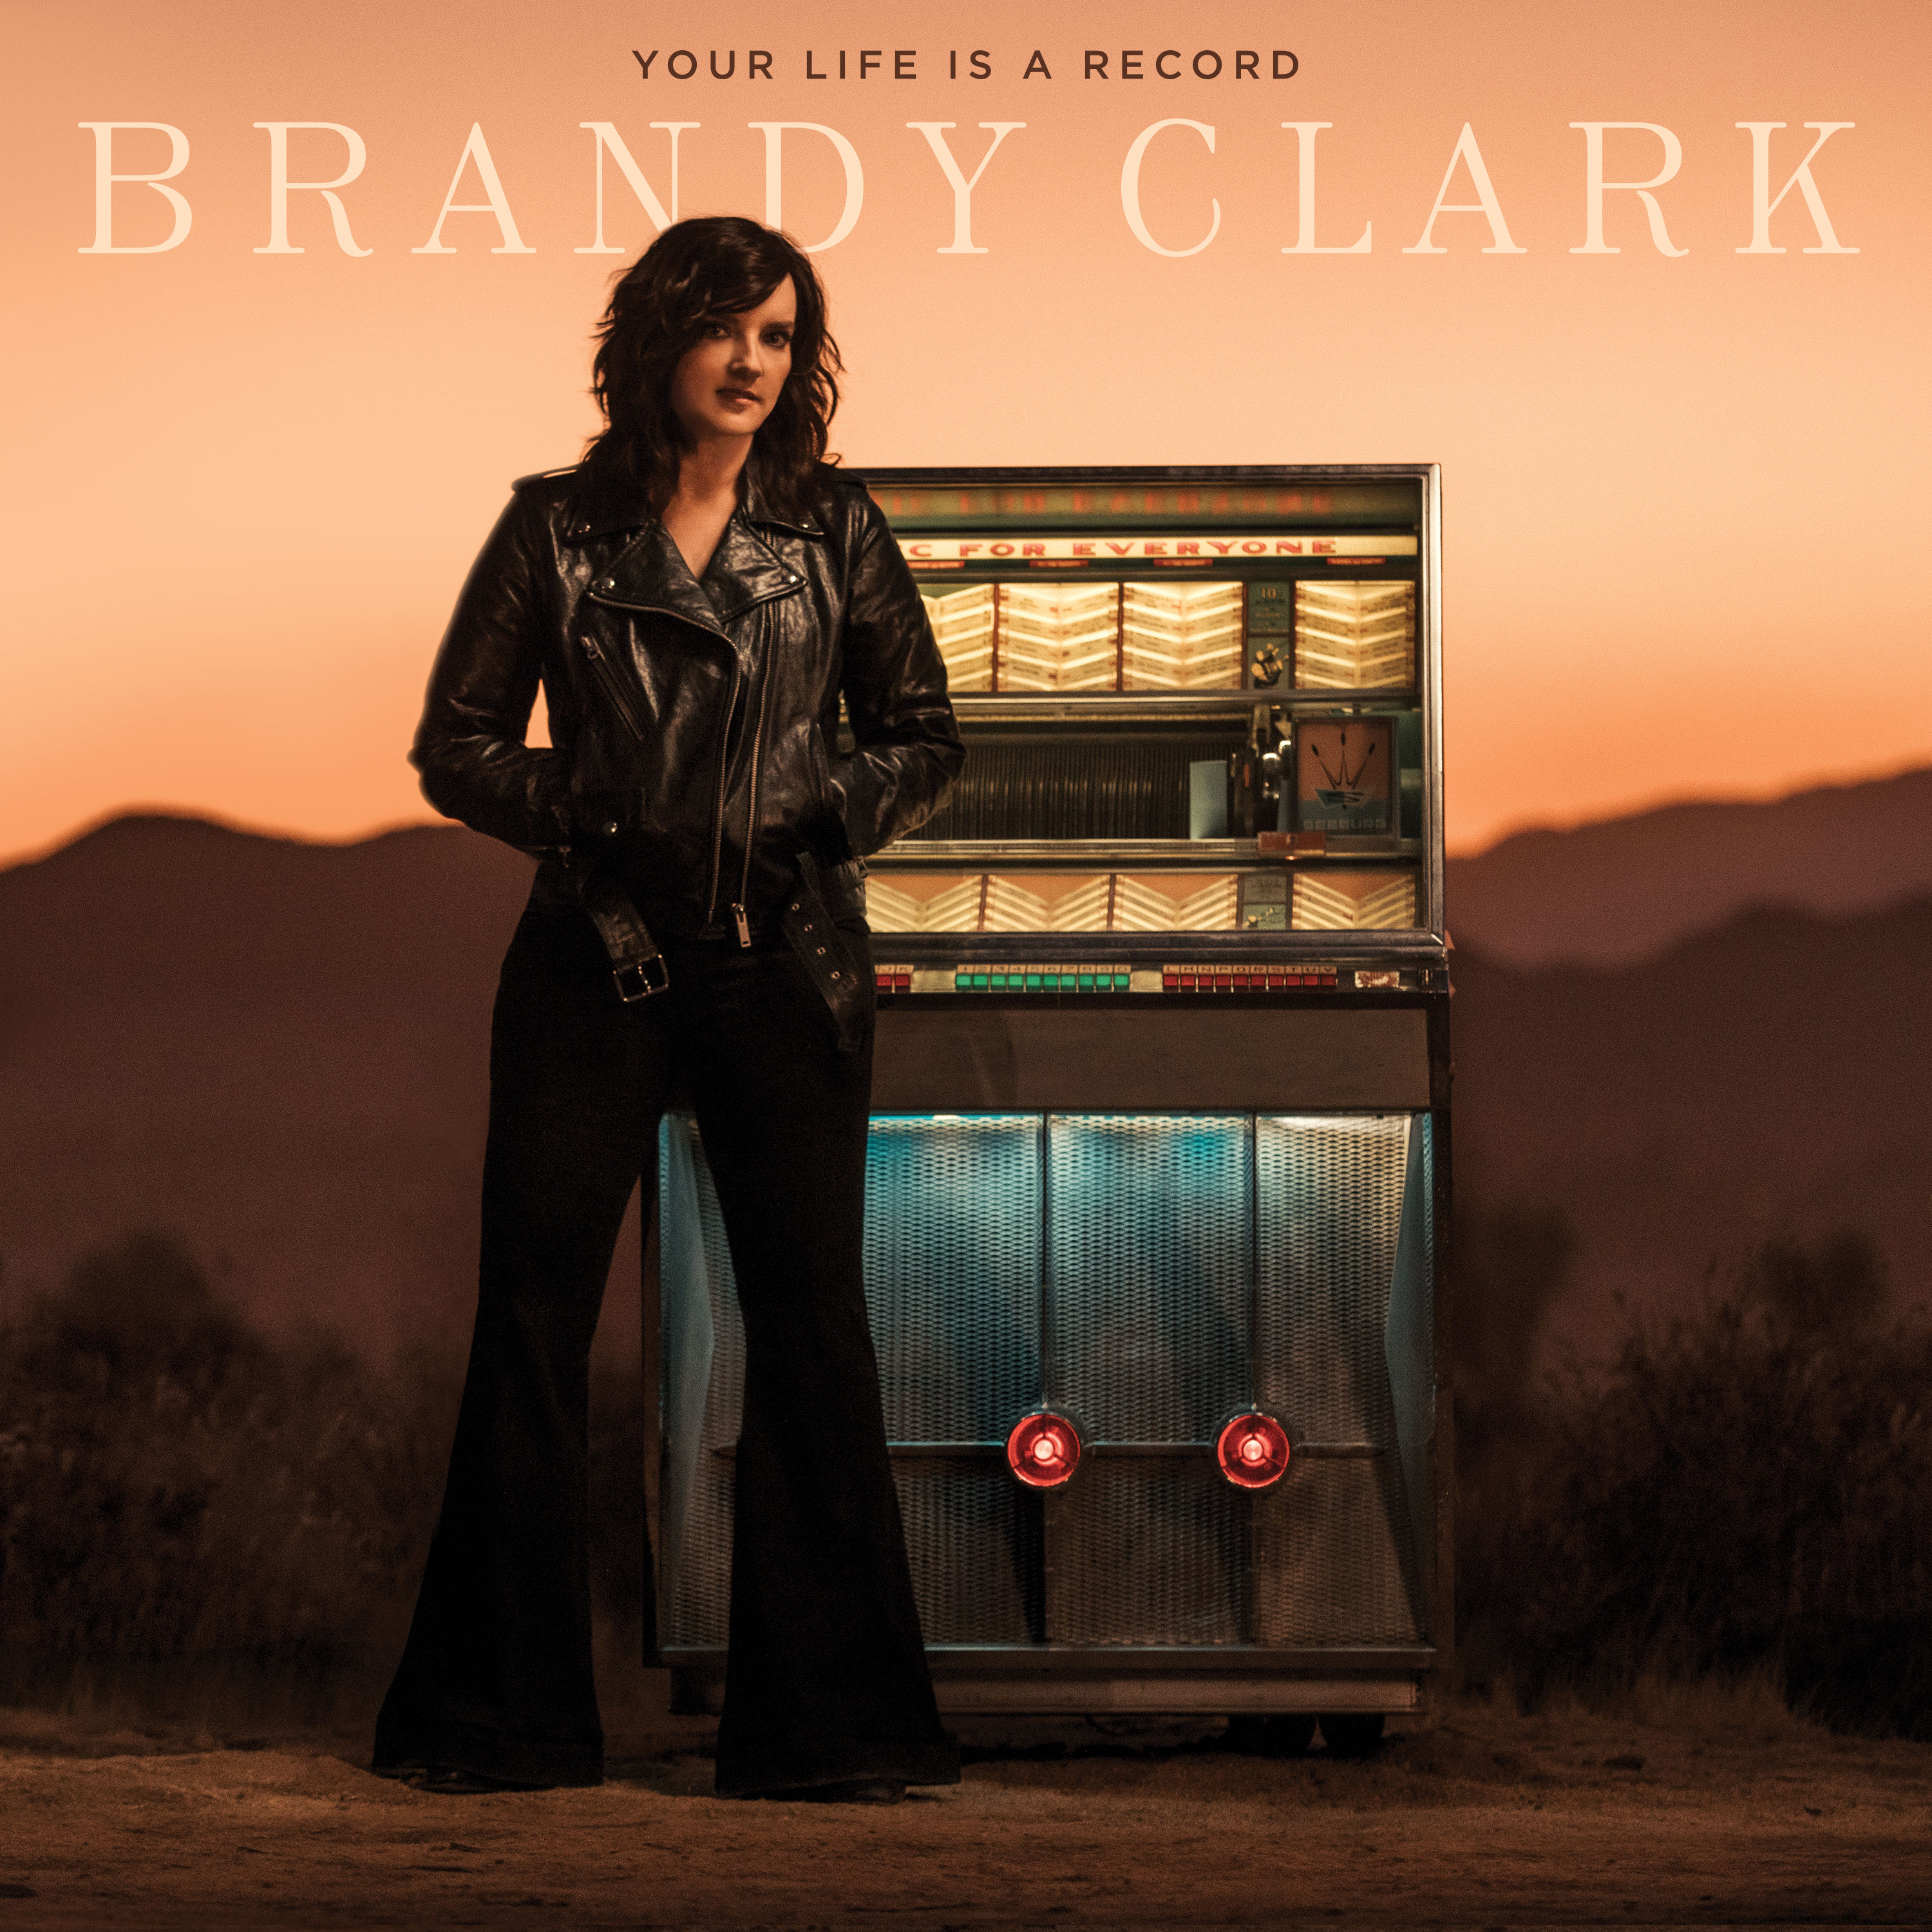 Brandy Clark - Your Life is a Record (2020) [FLAC 24bit/48kHz]